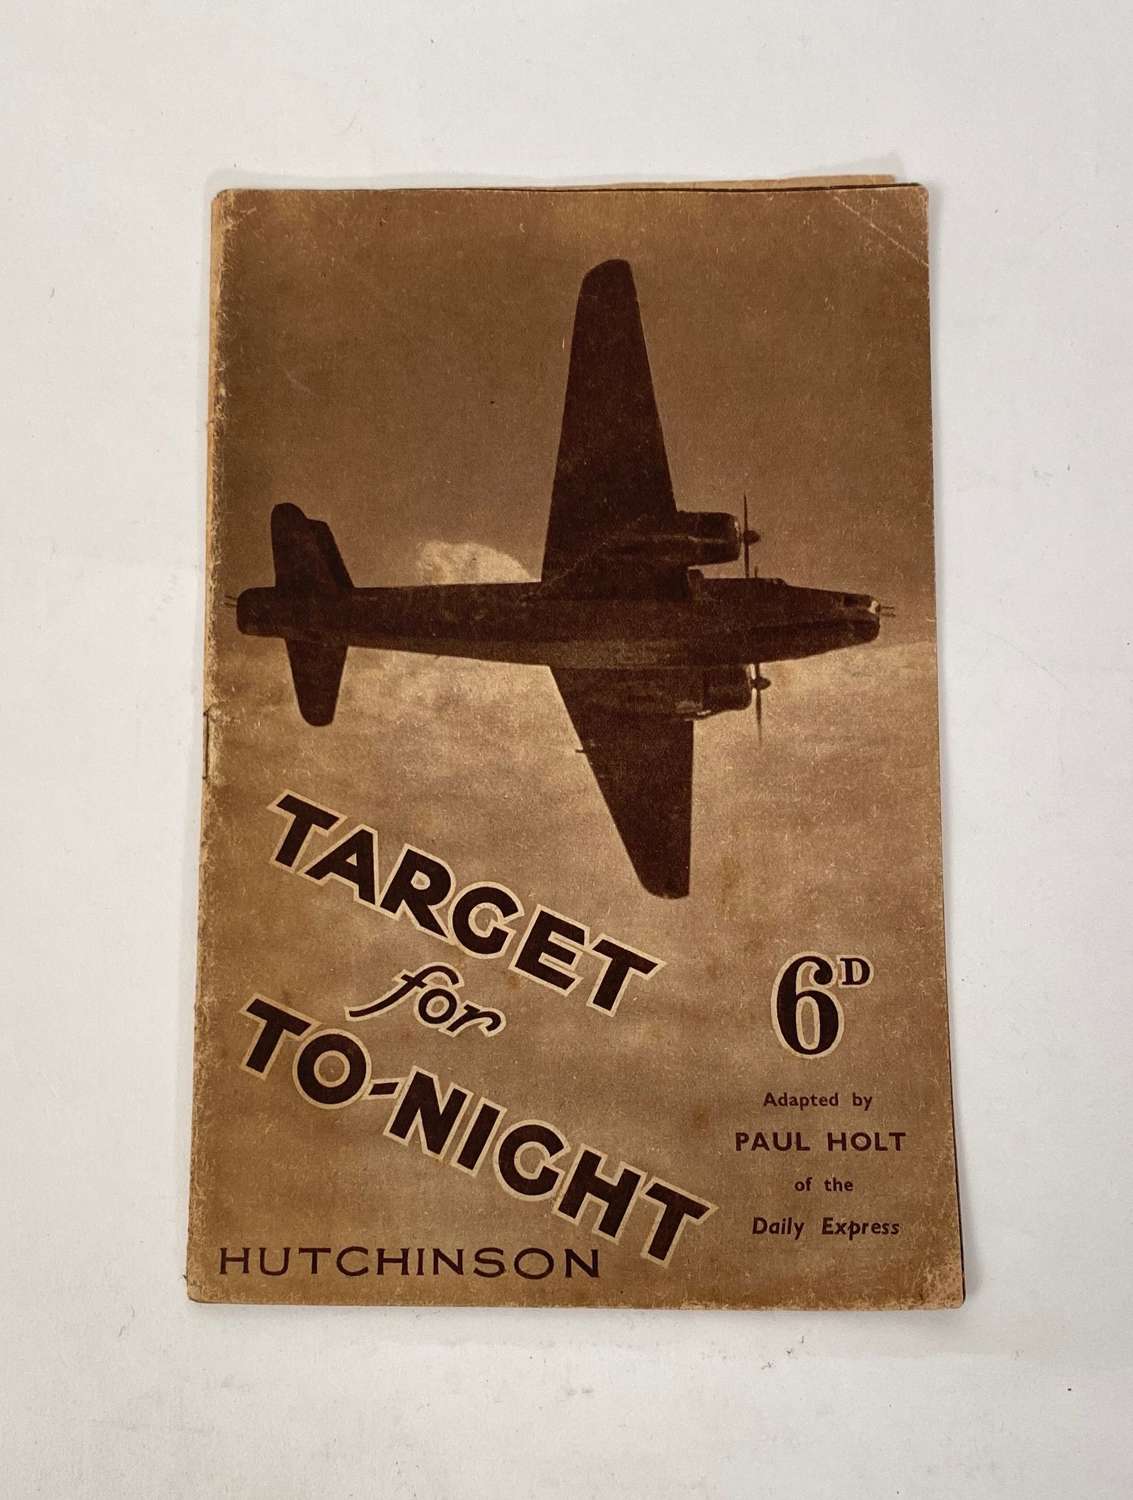 WW2 RAF Bomber Command Target For To-Night Film Book